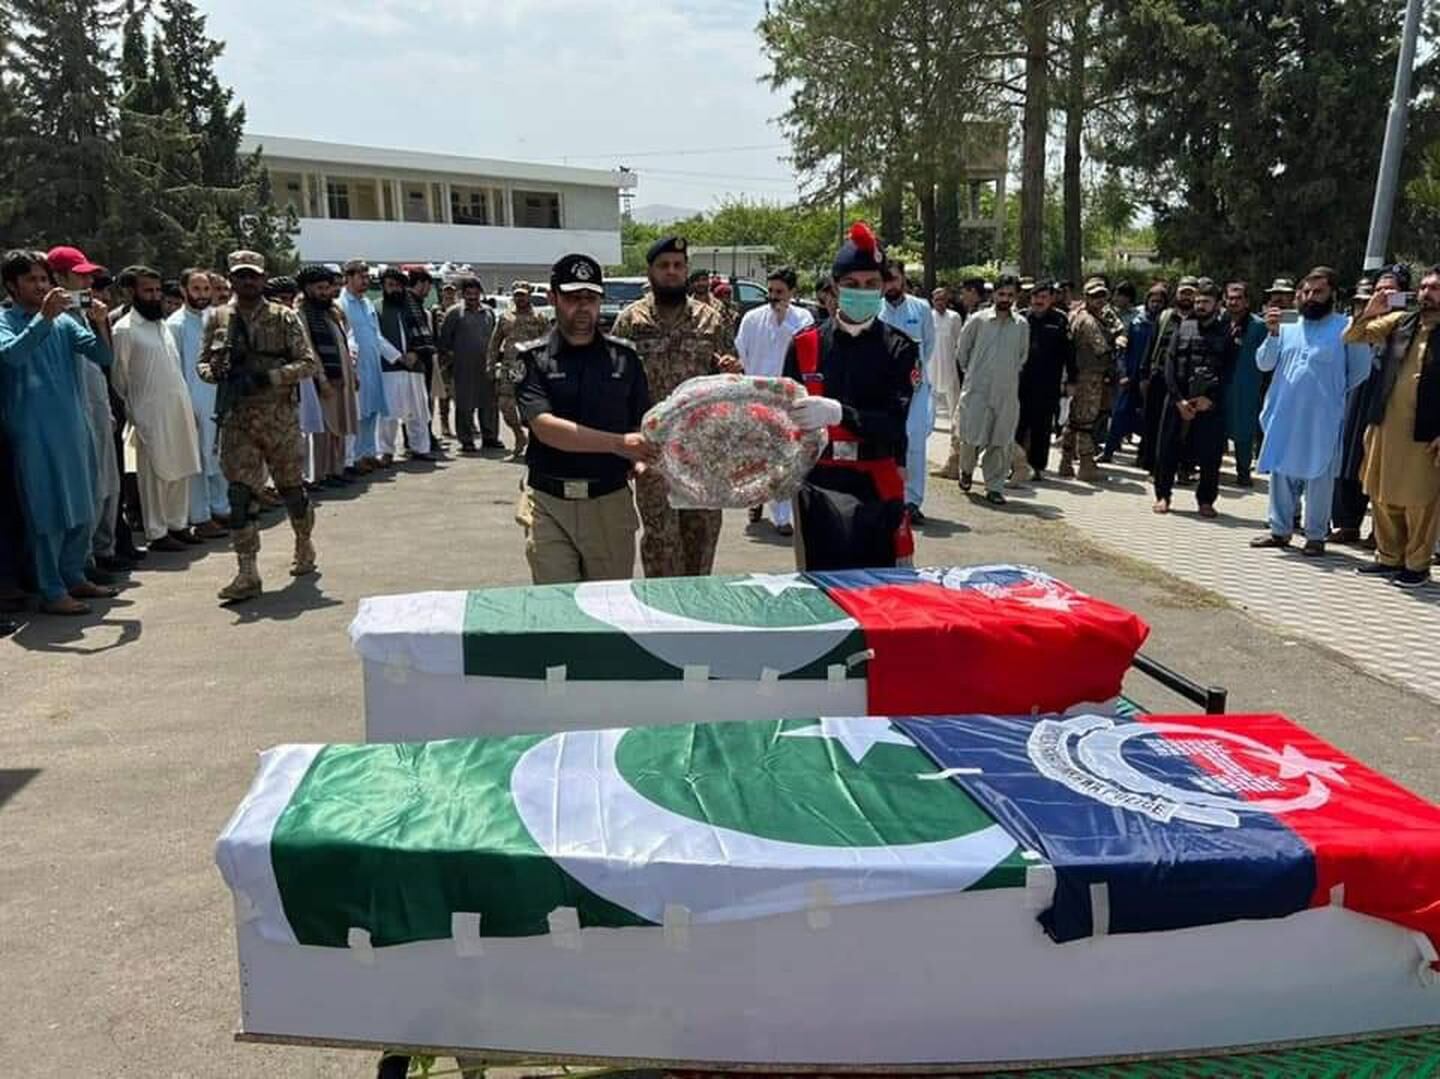 Police officials attend the funeral of two officers killed while guarding a polio vaccination team in Data Khel area of North Waziristan tribal region near the Afghan border, in Pakistan, in June. EPA